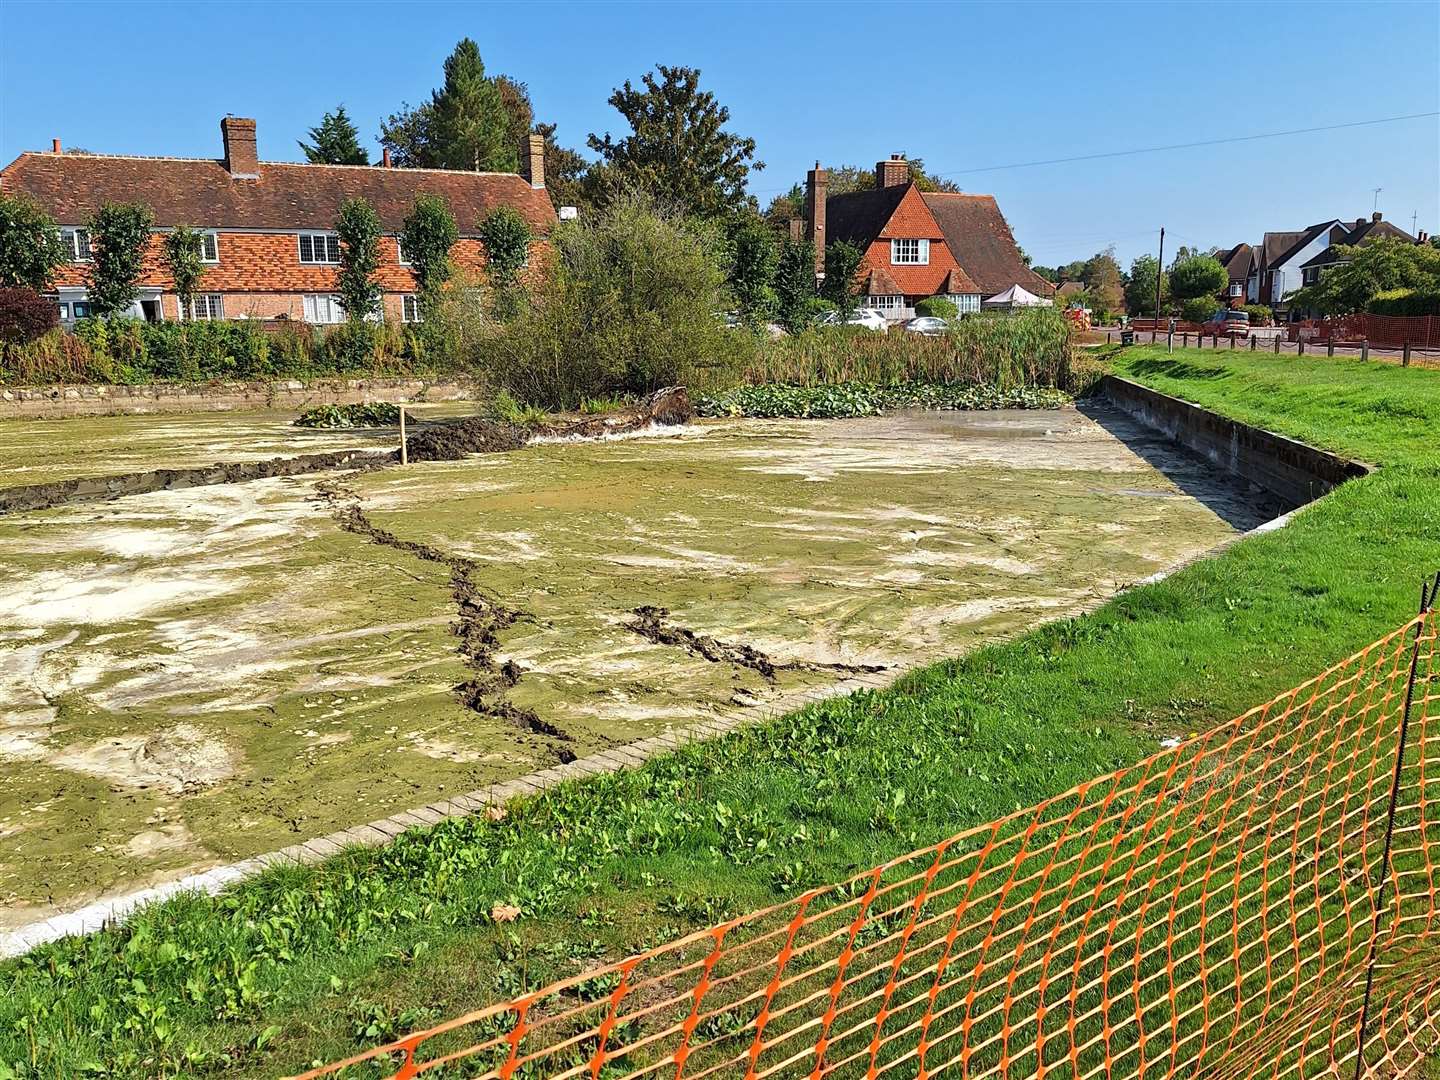 Matfield Village Pond has had to be drained to remove the invasive fish